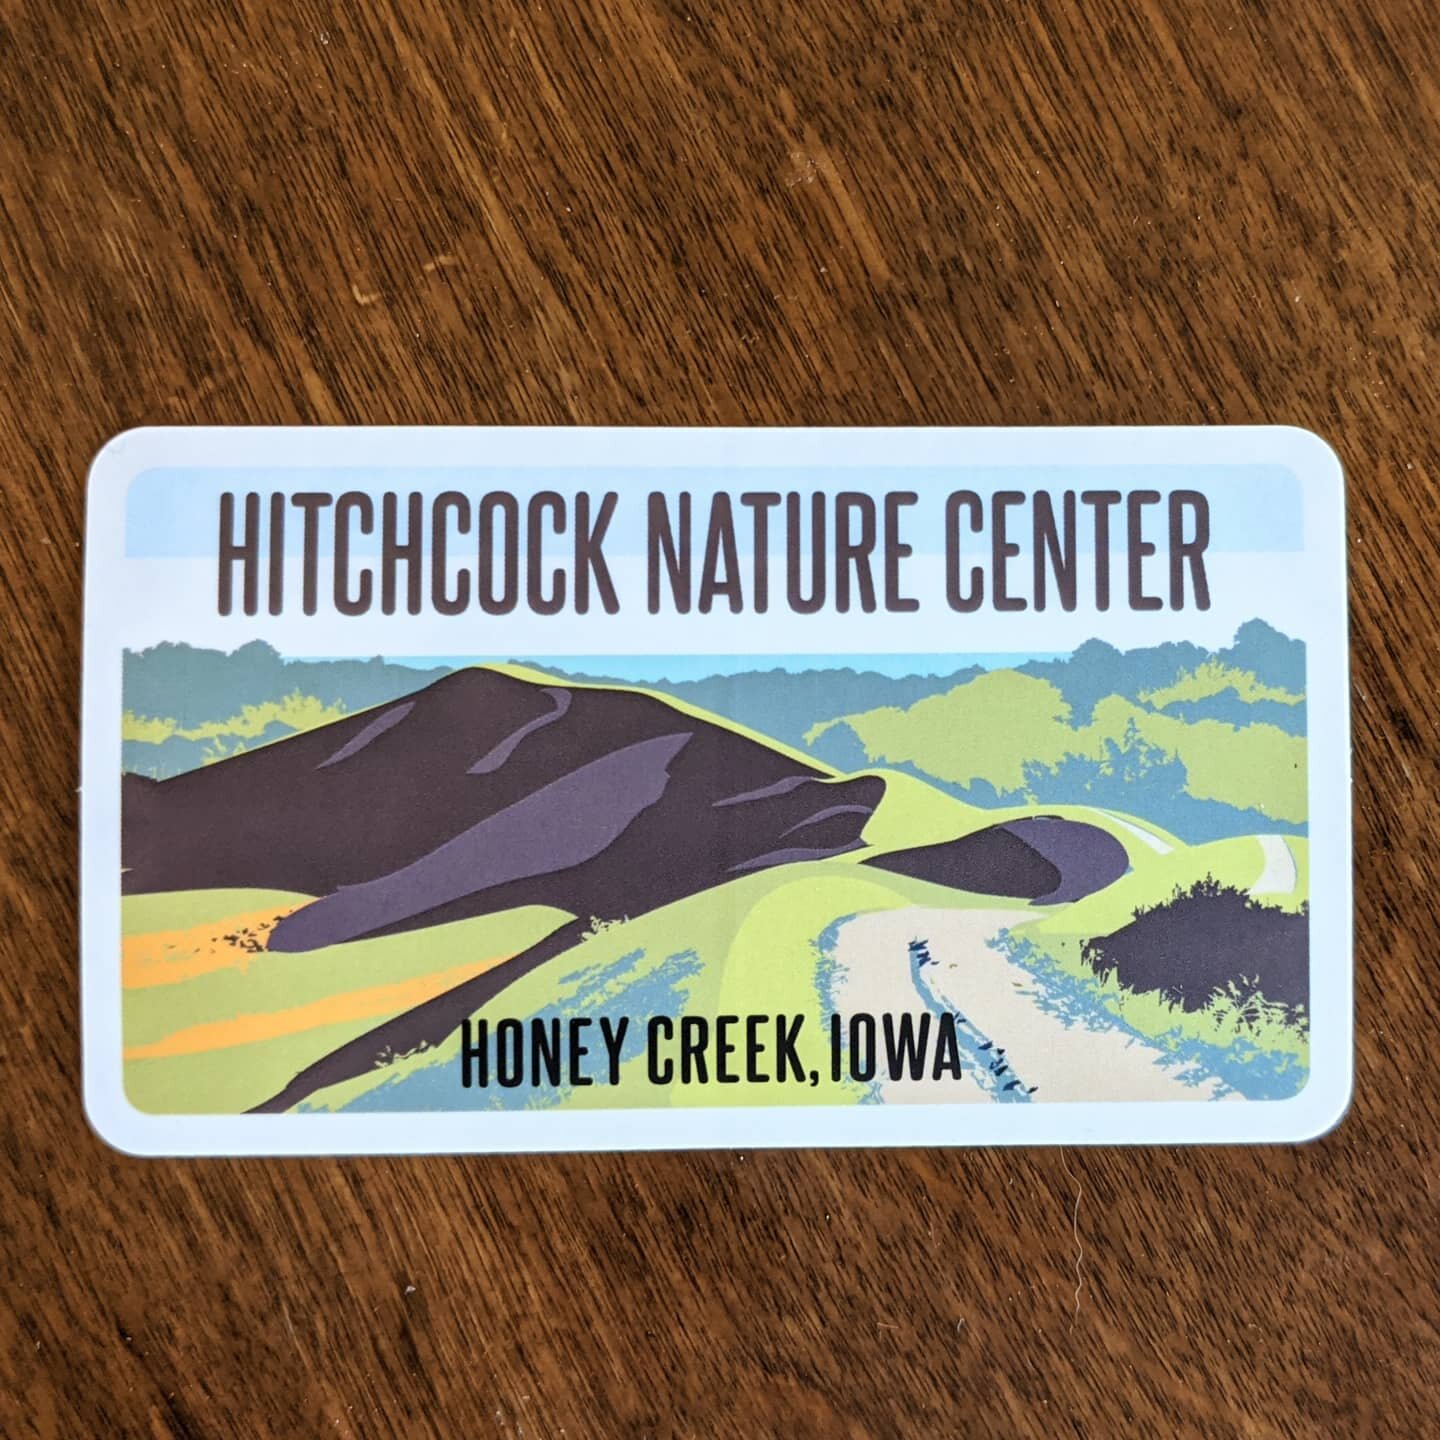 New sticker! Hitchcock Nature Center near Omaha has that classic loess hills look. Gorgeous. #iowaparks #loesshills #hikeiowa